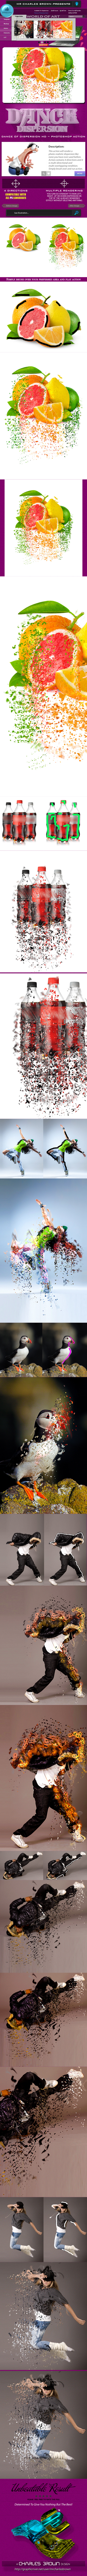 Dance of Dispersion HD ~ Photoshop Action